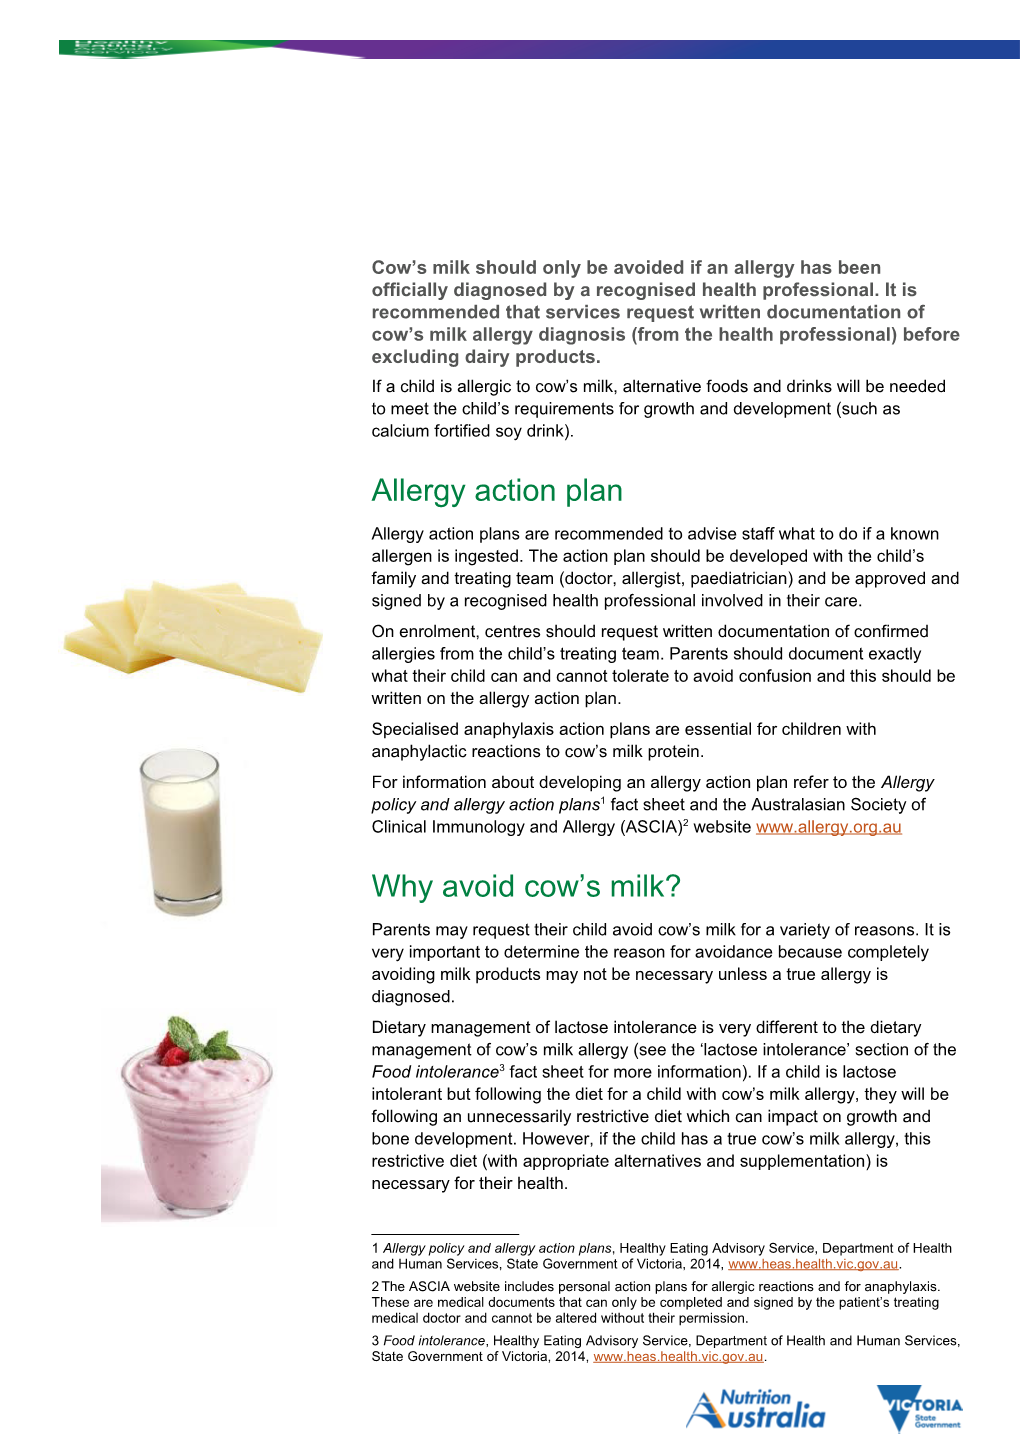 Cow S Milk Should Only Be Avoided If an Allergy Has Been Officially Diagnosed by a Recognised